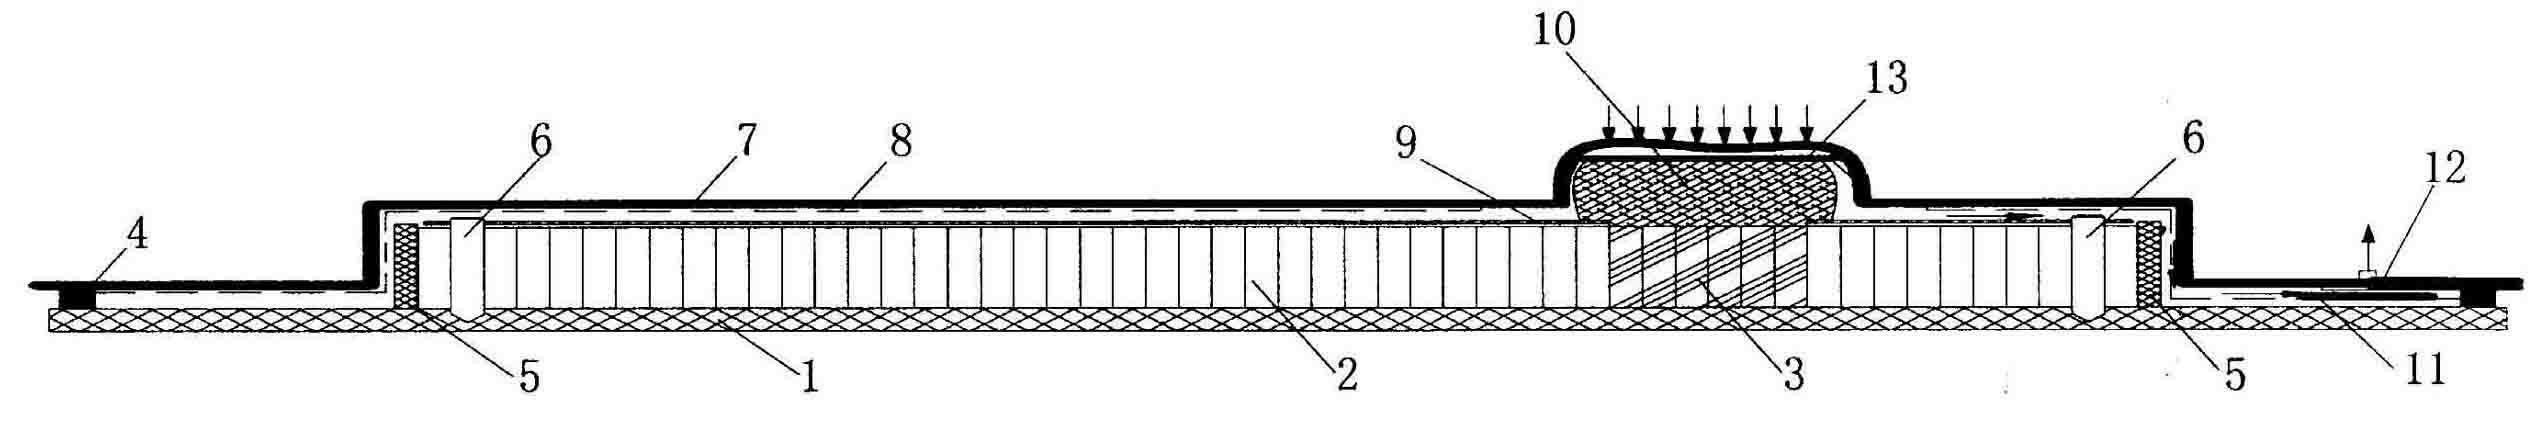 Honeycomb Sandwich Part Pre-filling and Forming Tooling and Its Process Method